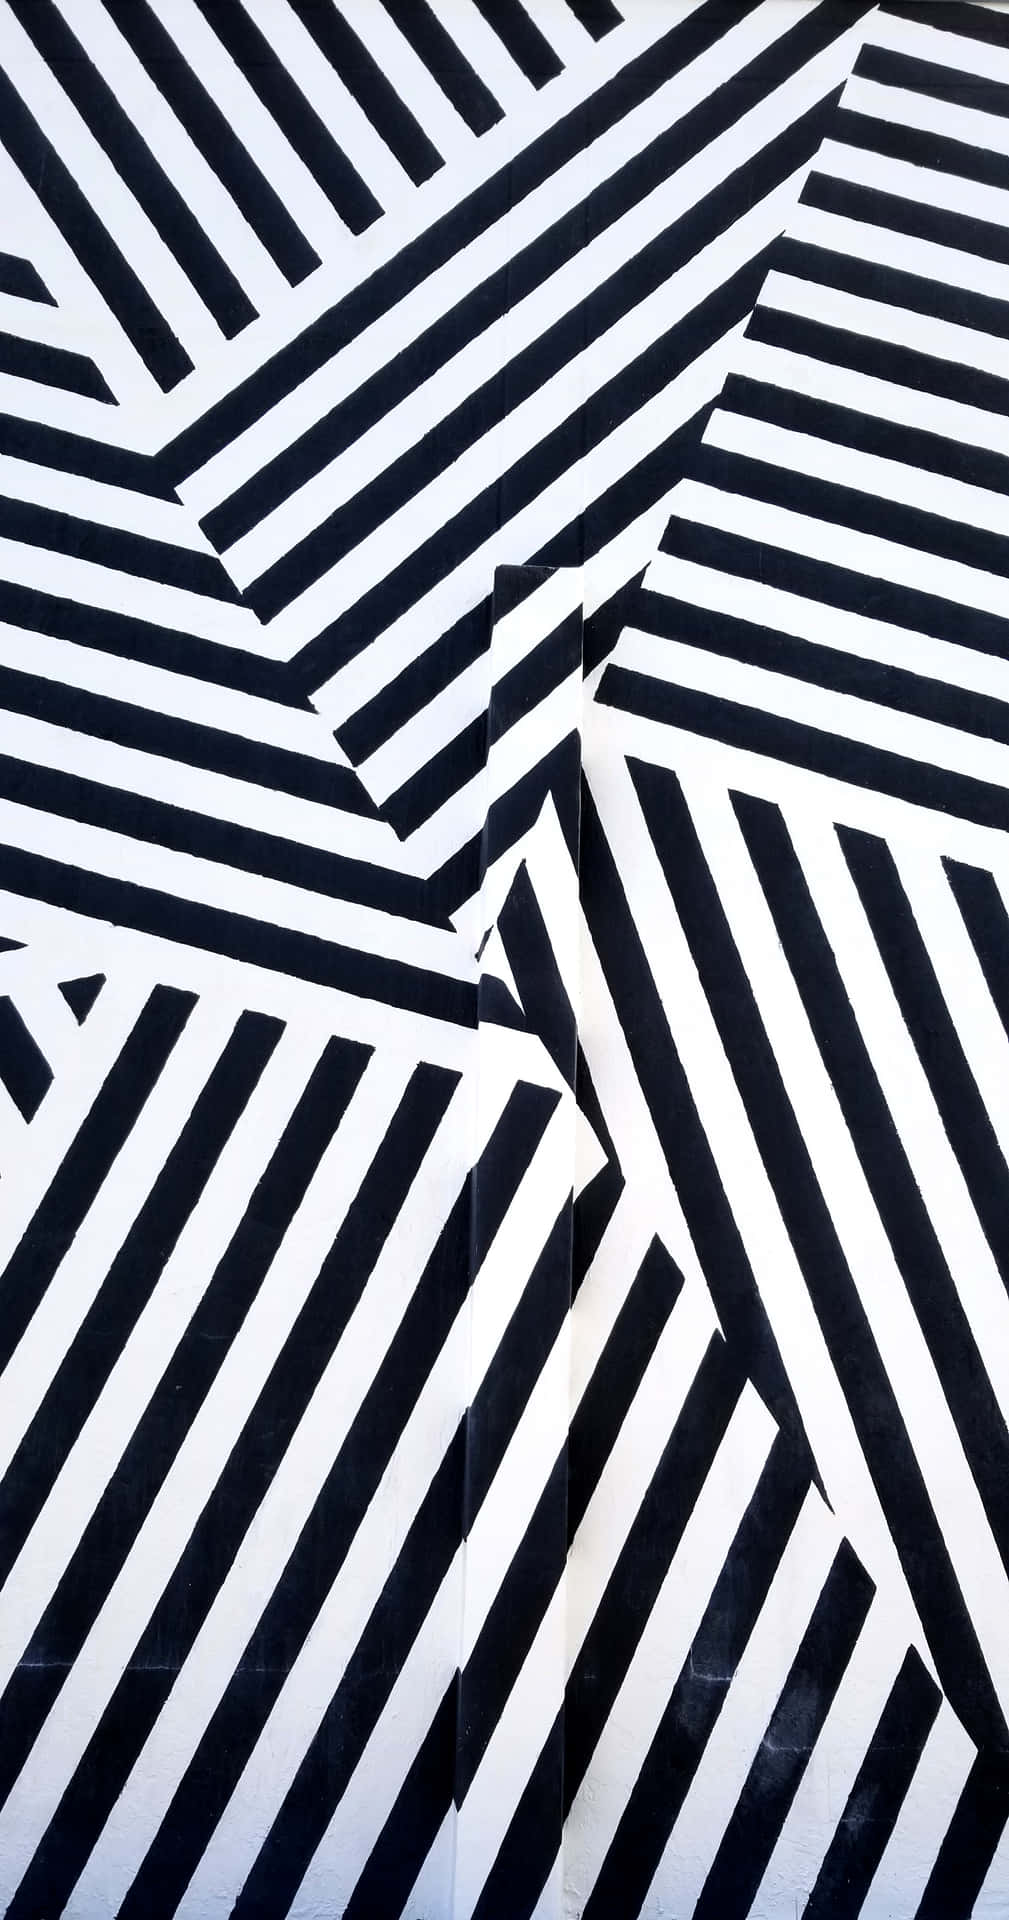 Intricate Black And White Geometric Patterned Background